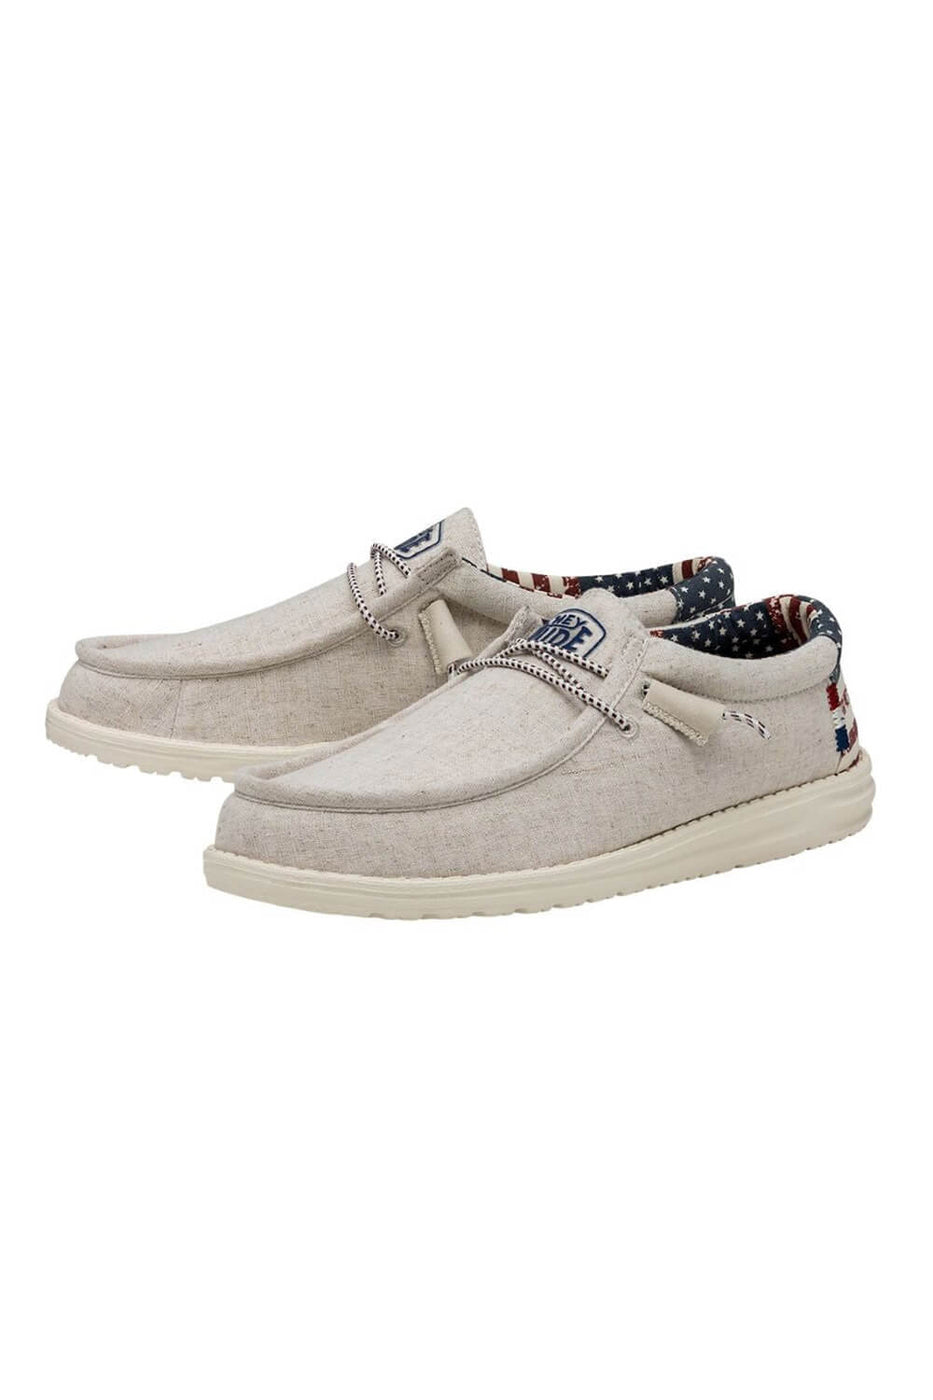 Hey Dude Shoes Wally Braided Shoes in Off White